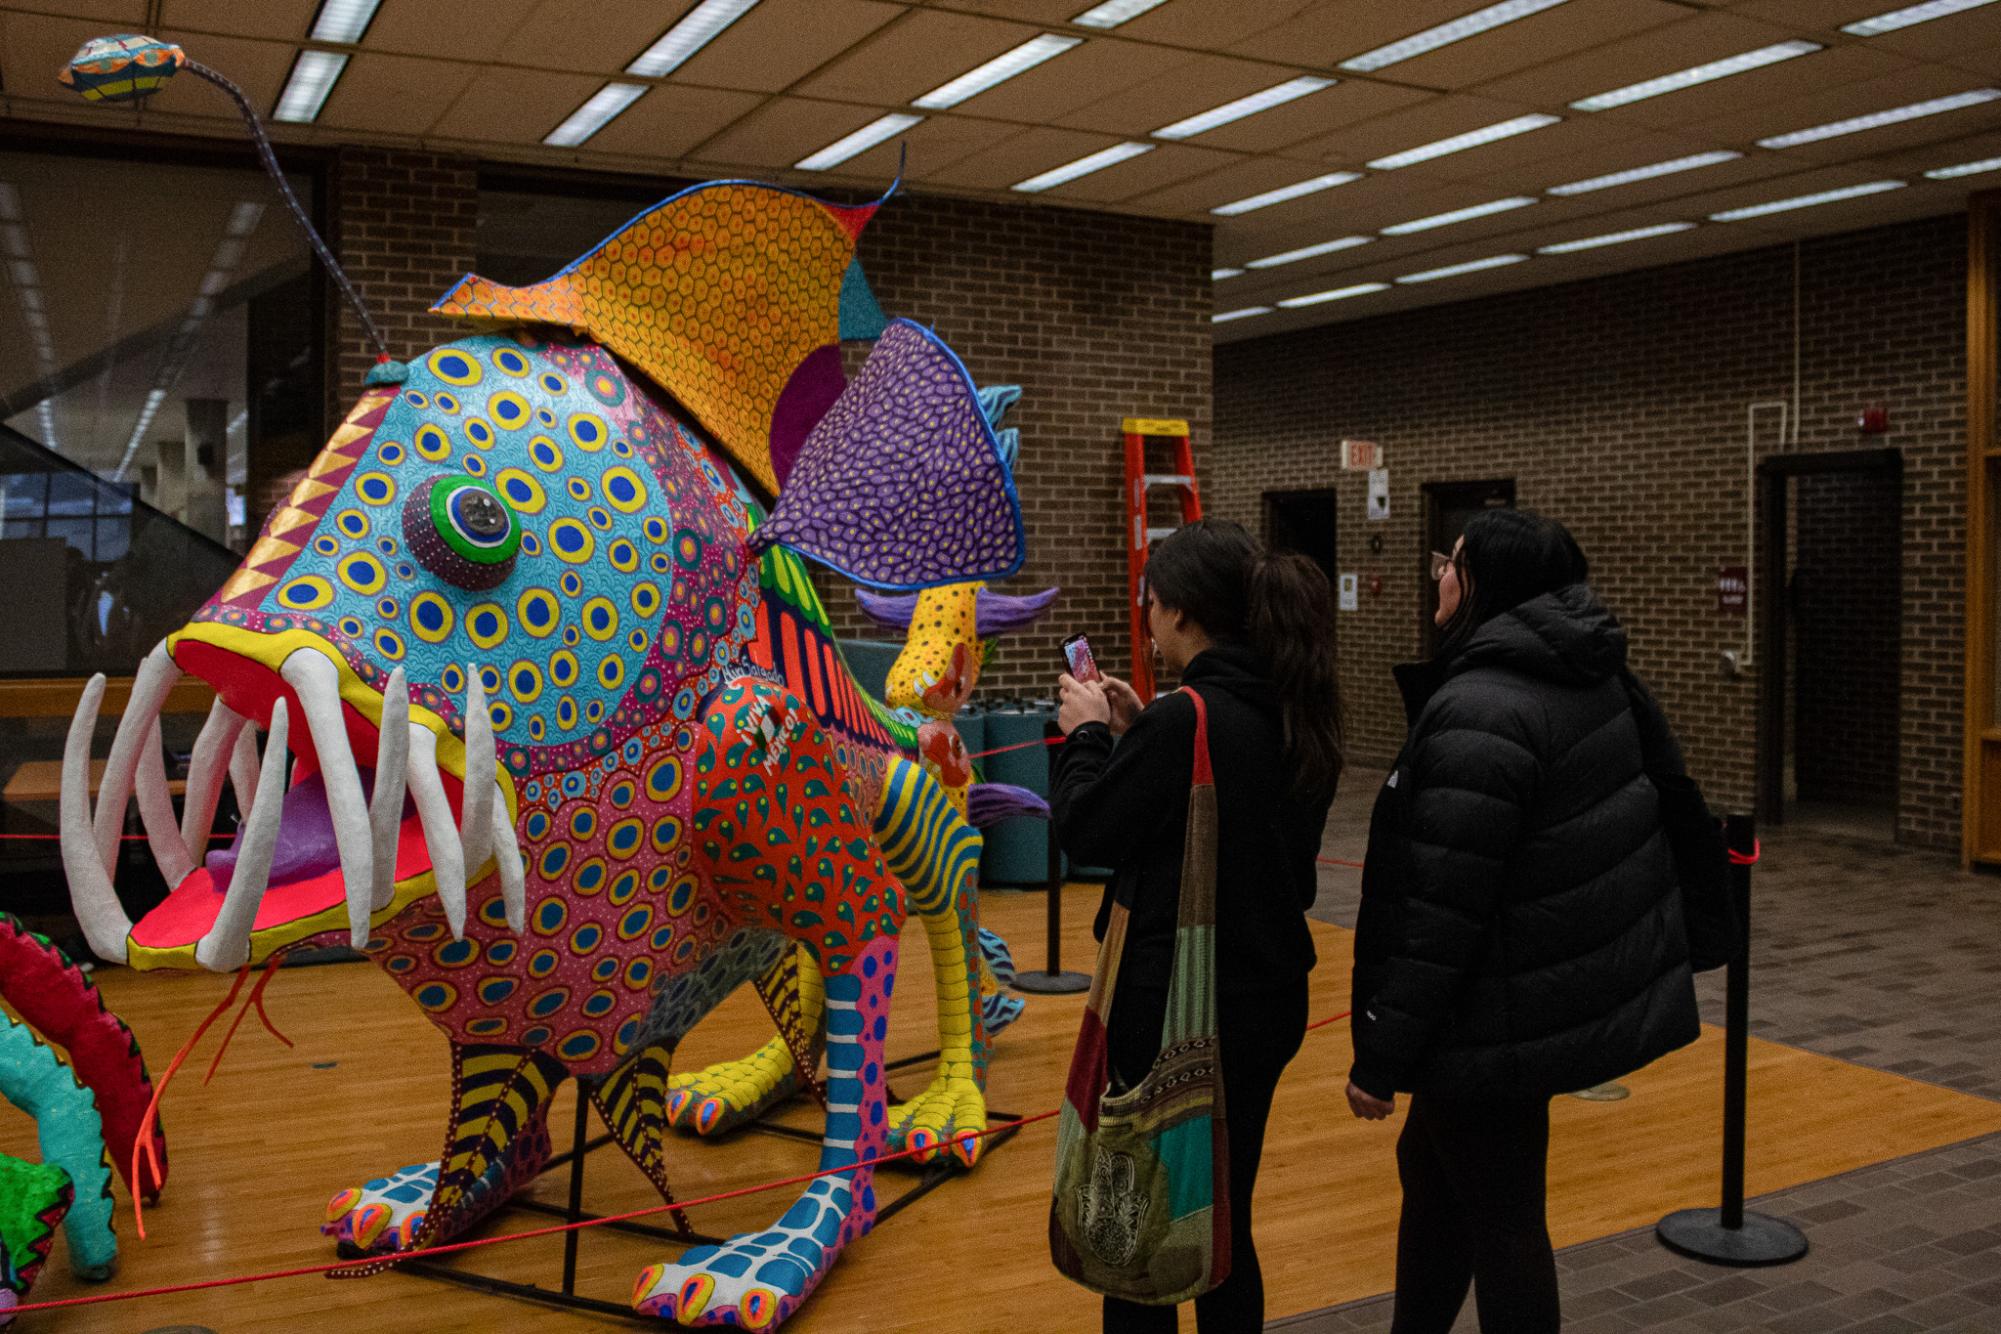 Perla Marrufo (left), a junior psychology major, takes a photo of the alebrijes “Patapez” art installation while Ajla Omerovic, a senior accounting major, admires the sculpture. The sculpture’s bright colors and patterns caught the students’ eyes while walking through the lobby at the Founder Memorial Library. (Totus Tuus Keely | Northern Star)